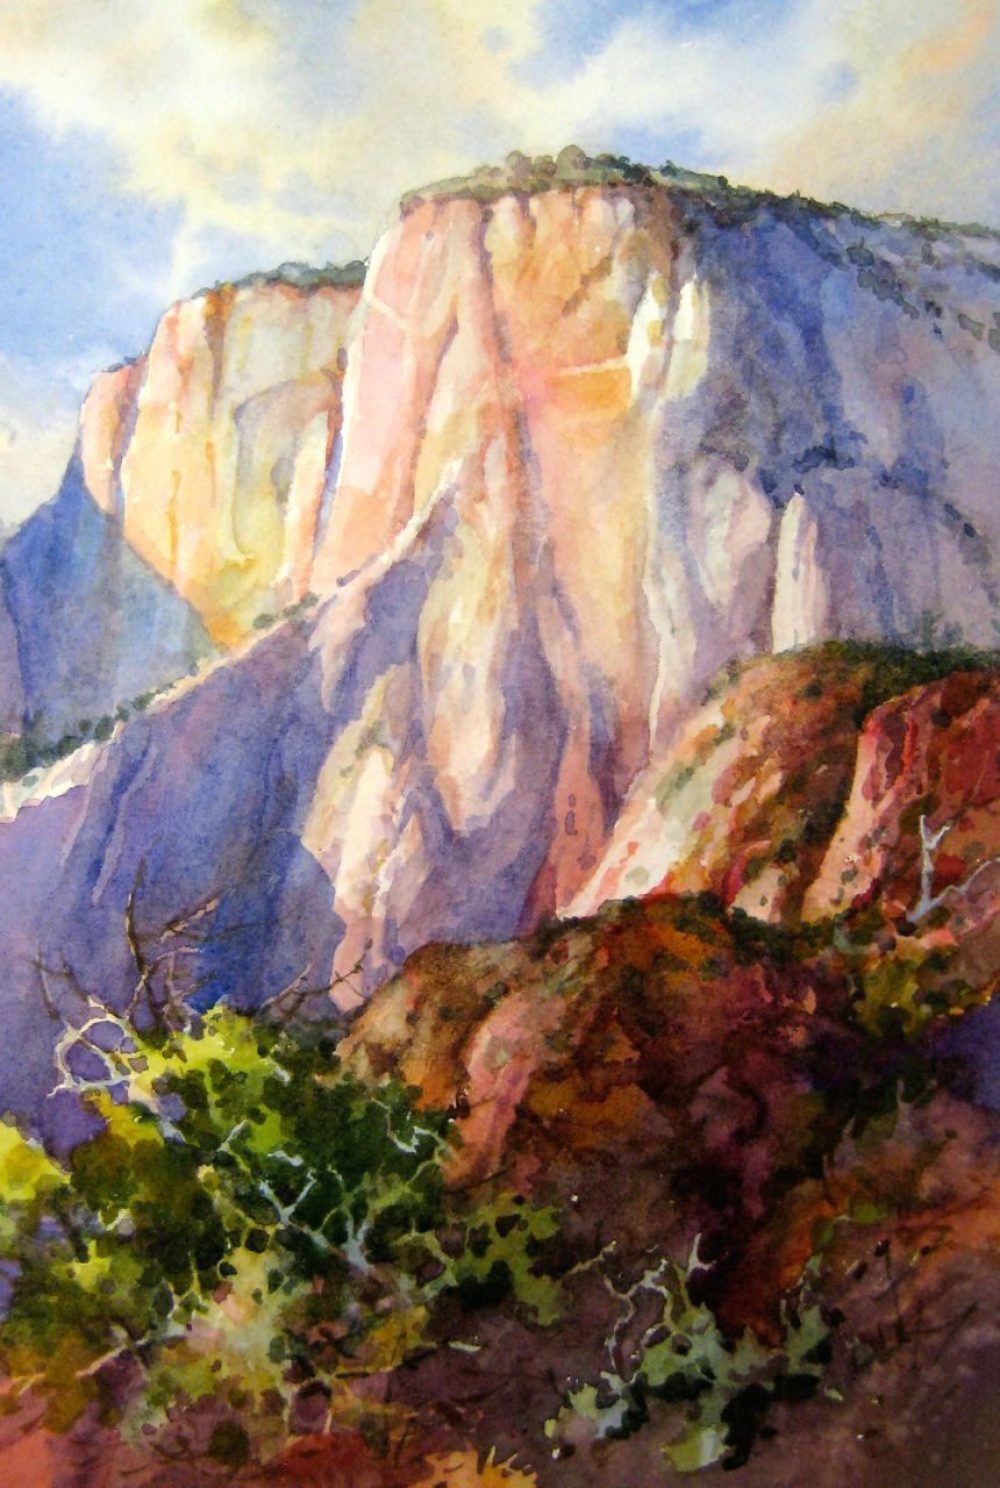 Altar of Sacrifice - Watercolor Painting of Zion National Park